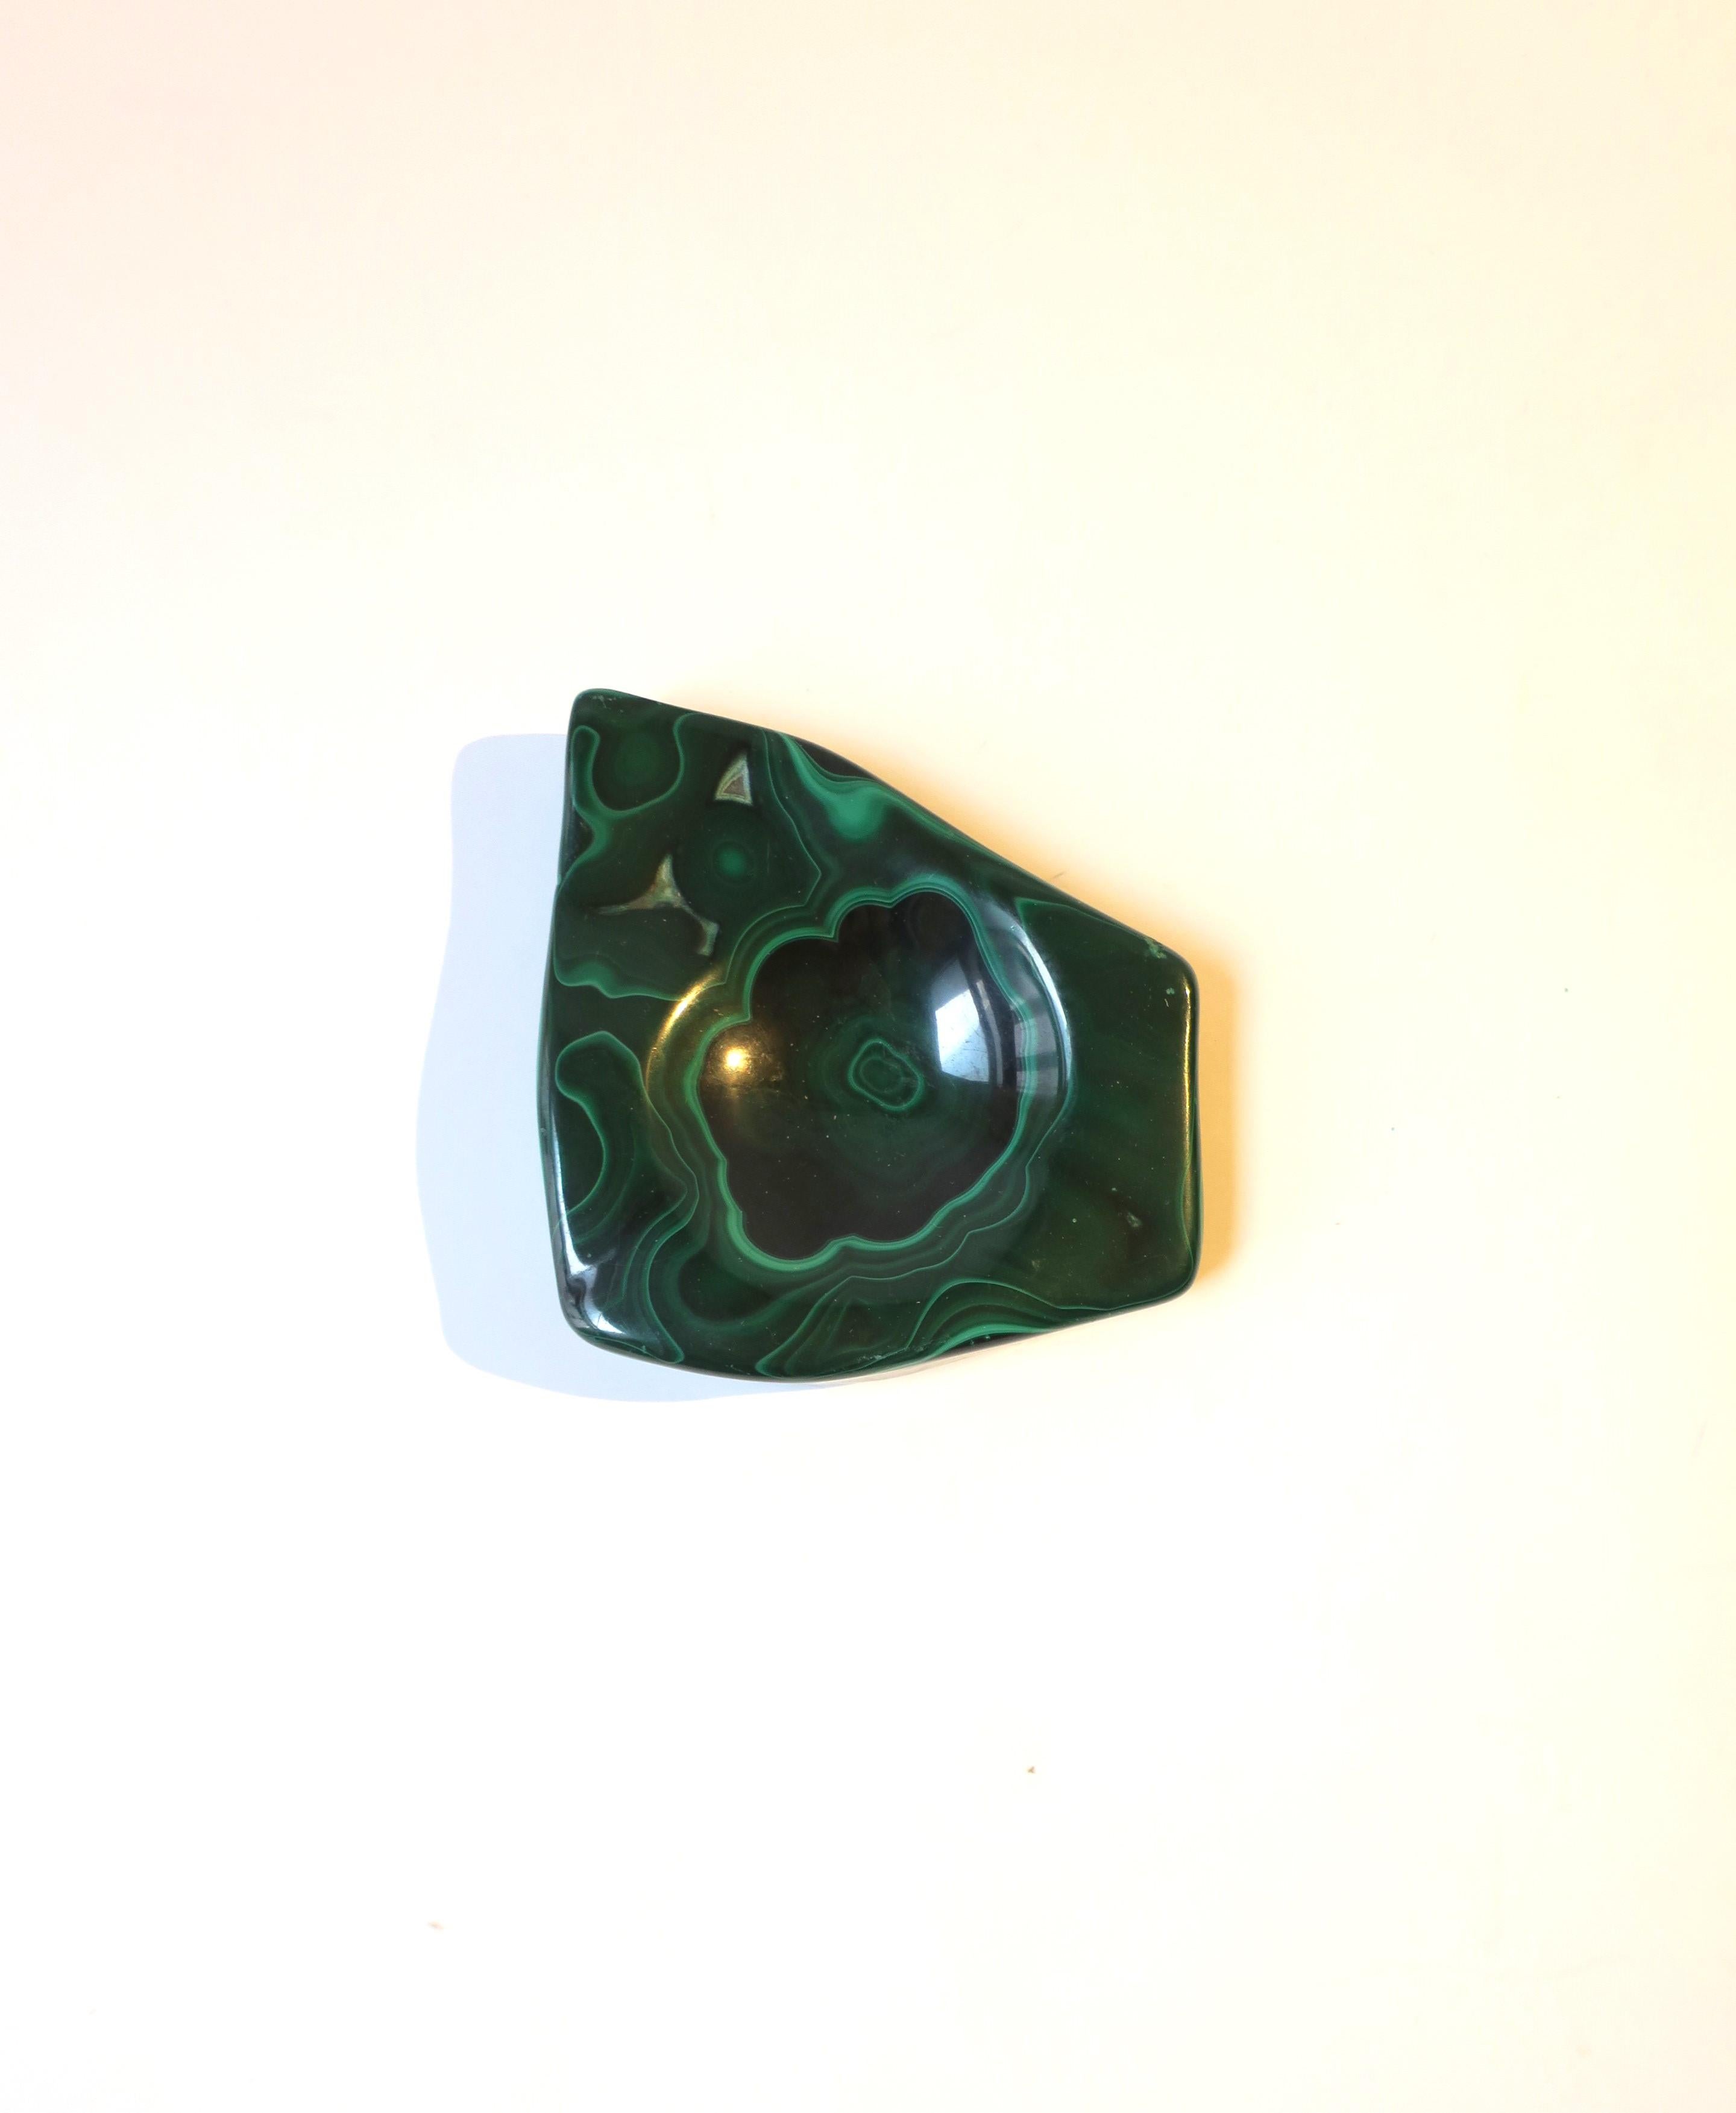 Polished Malachite Jewelry Dish Vide-Poche Abstract Shape For Sale